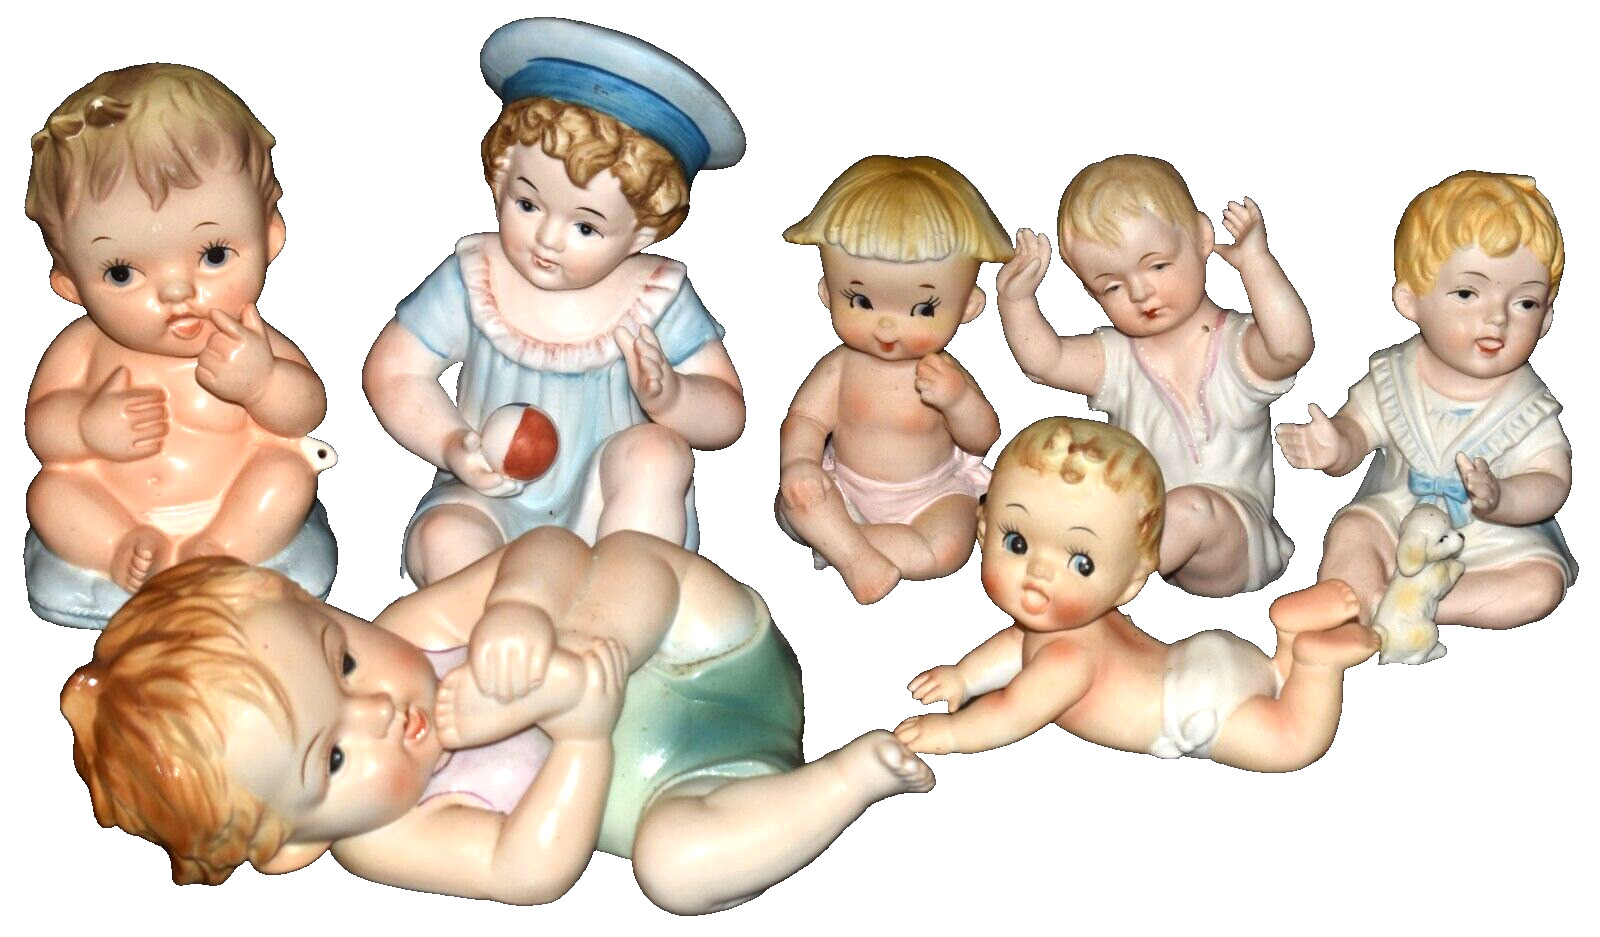 Lot Of 7 Vintage Piano Baby Porcelain Figurines